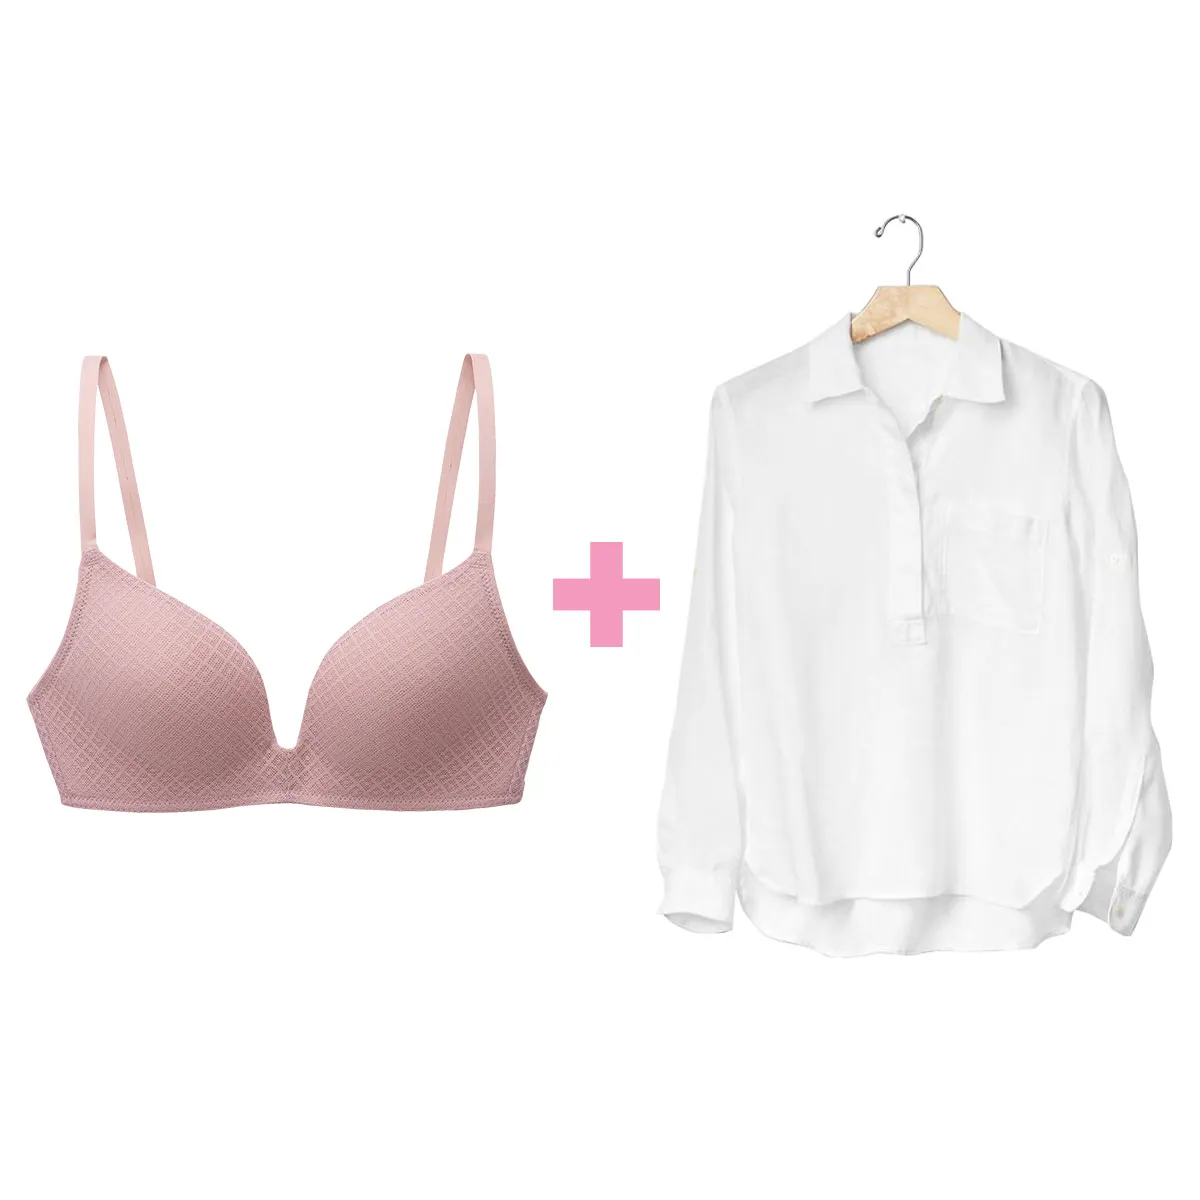 What color bra do you wear under a white shirt? Why wearing a white bra under a white shirt is wrong?